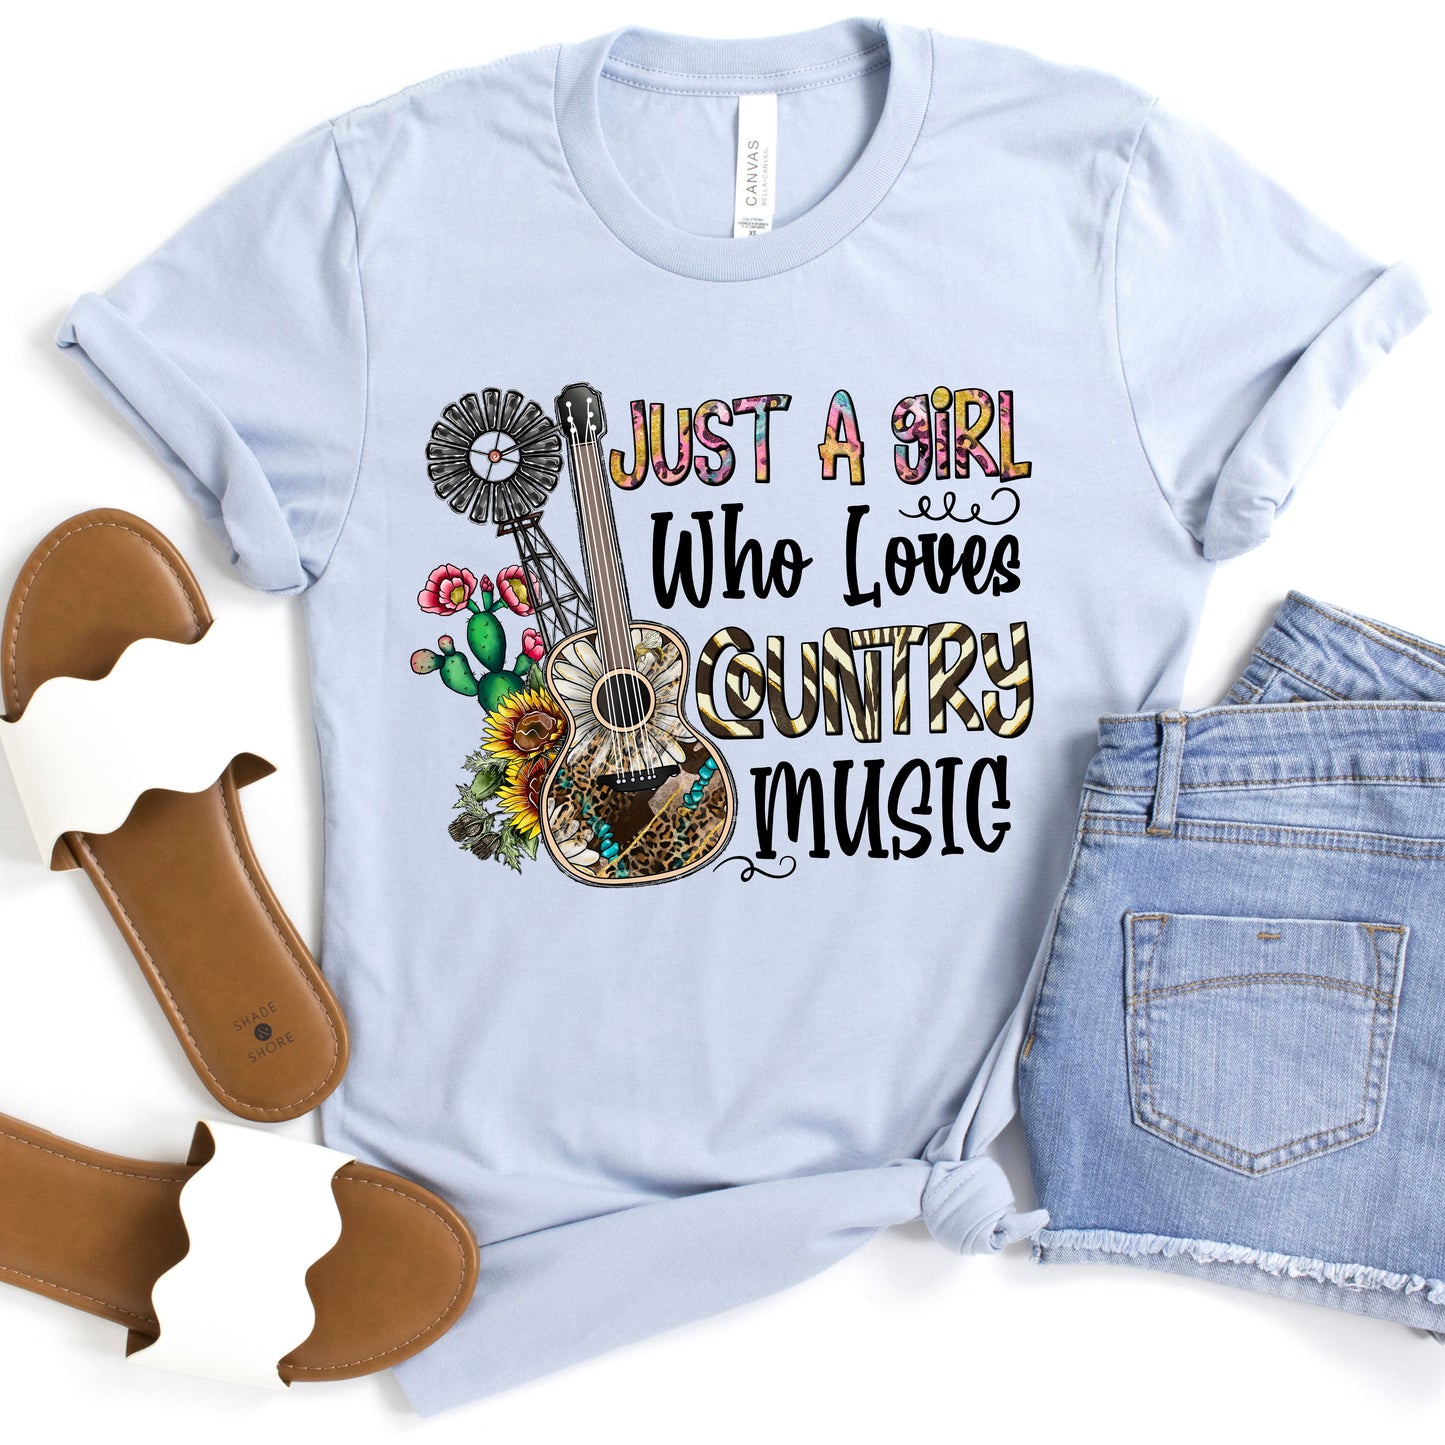 Just a Girl Who Loves Country Music Short Sleeve T-Shirt